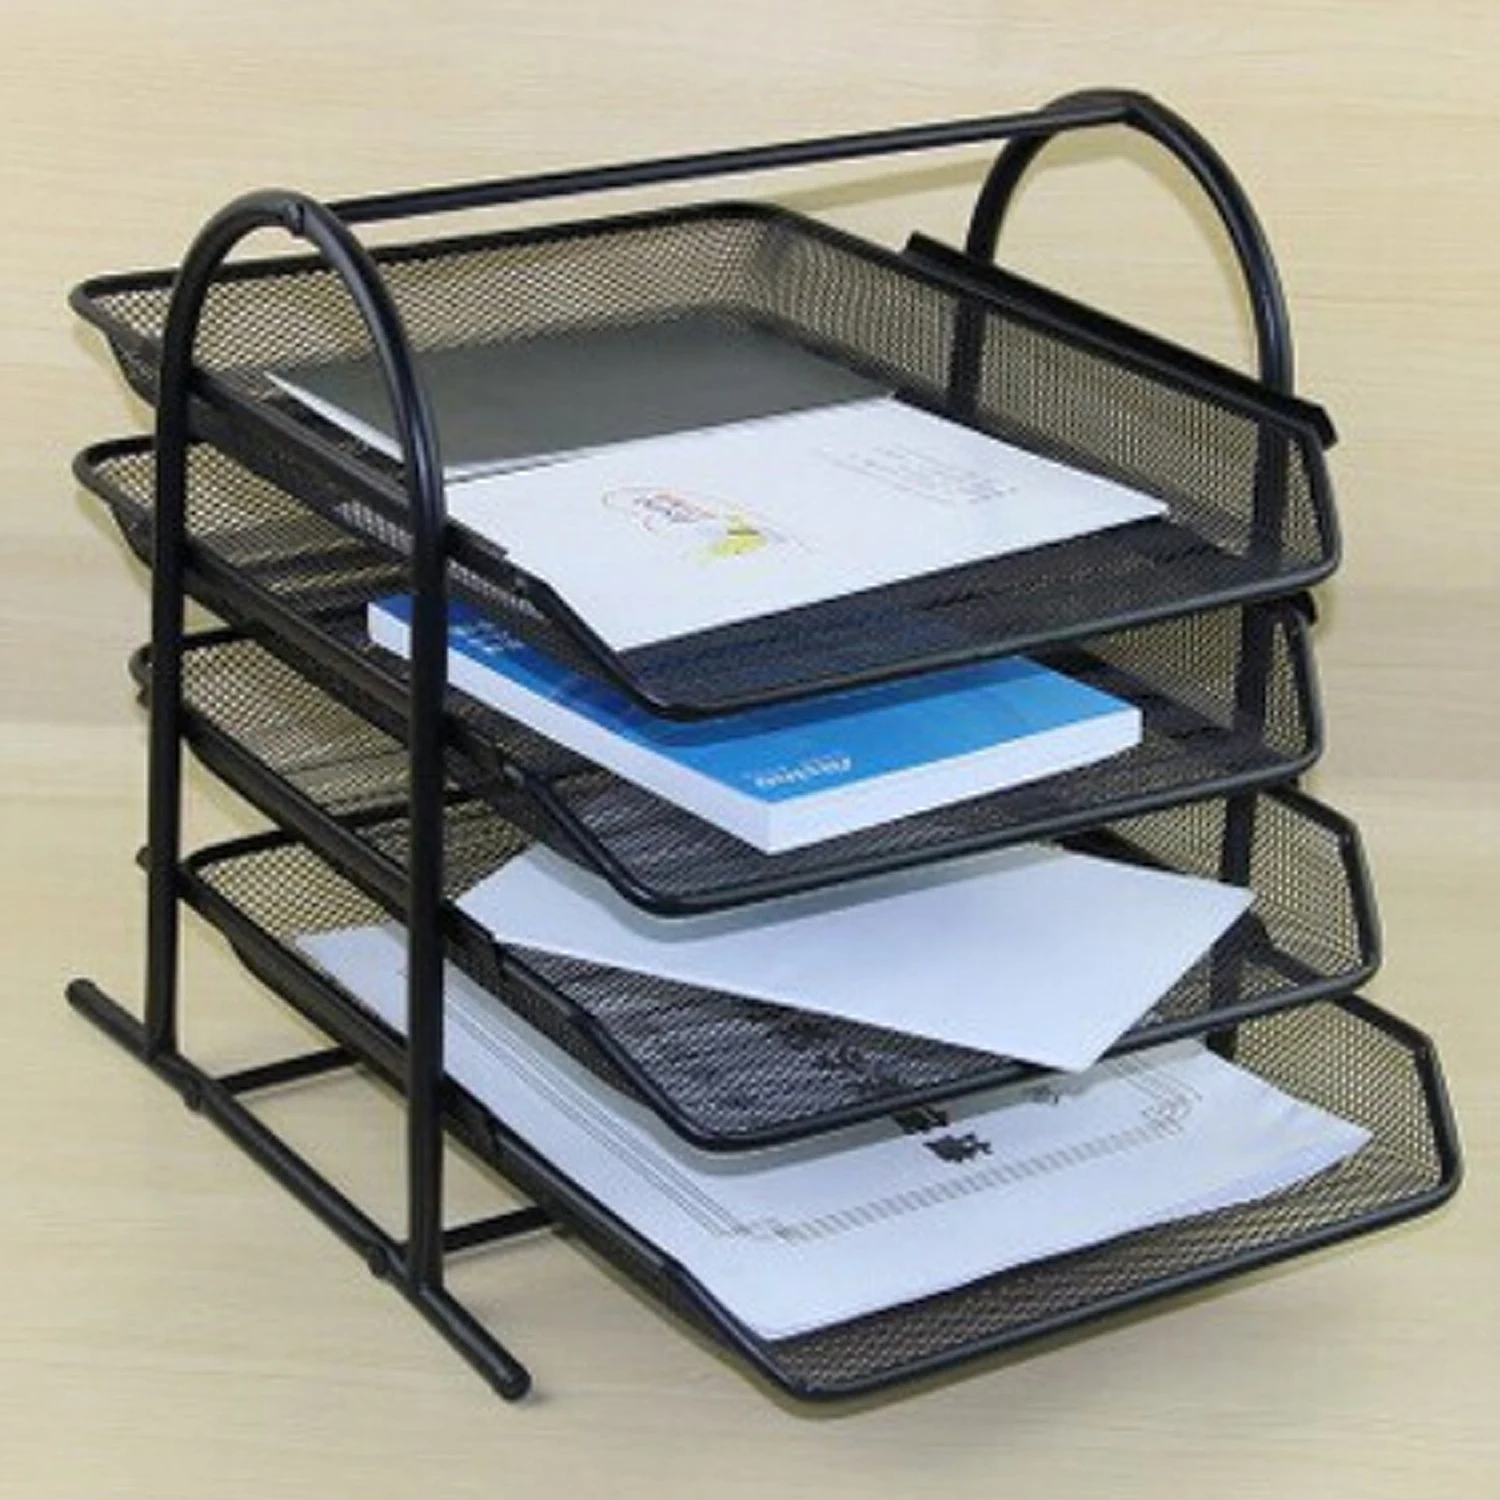 4-Tier Mesh File Holder Stand Organizer Tray for Magazine Letter Paper Document Home Office Desk Supplies